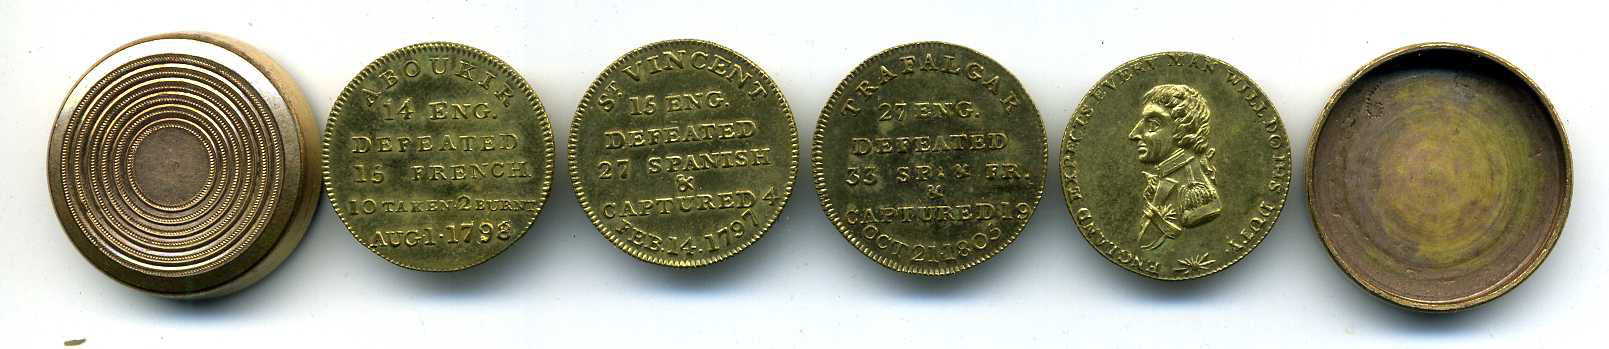 Nelson’s Victories, set of four gilt-bronze medalets, circa 1805, types as previous lot, 20mm (BHM